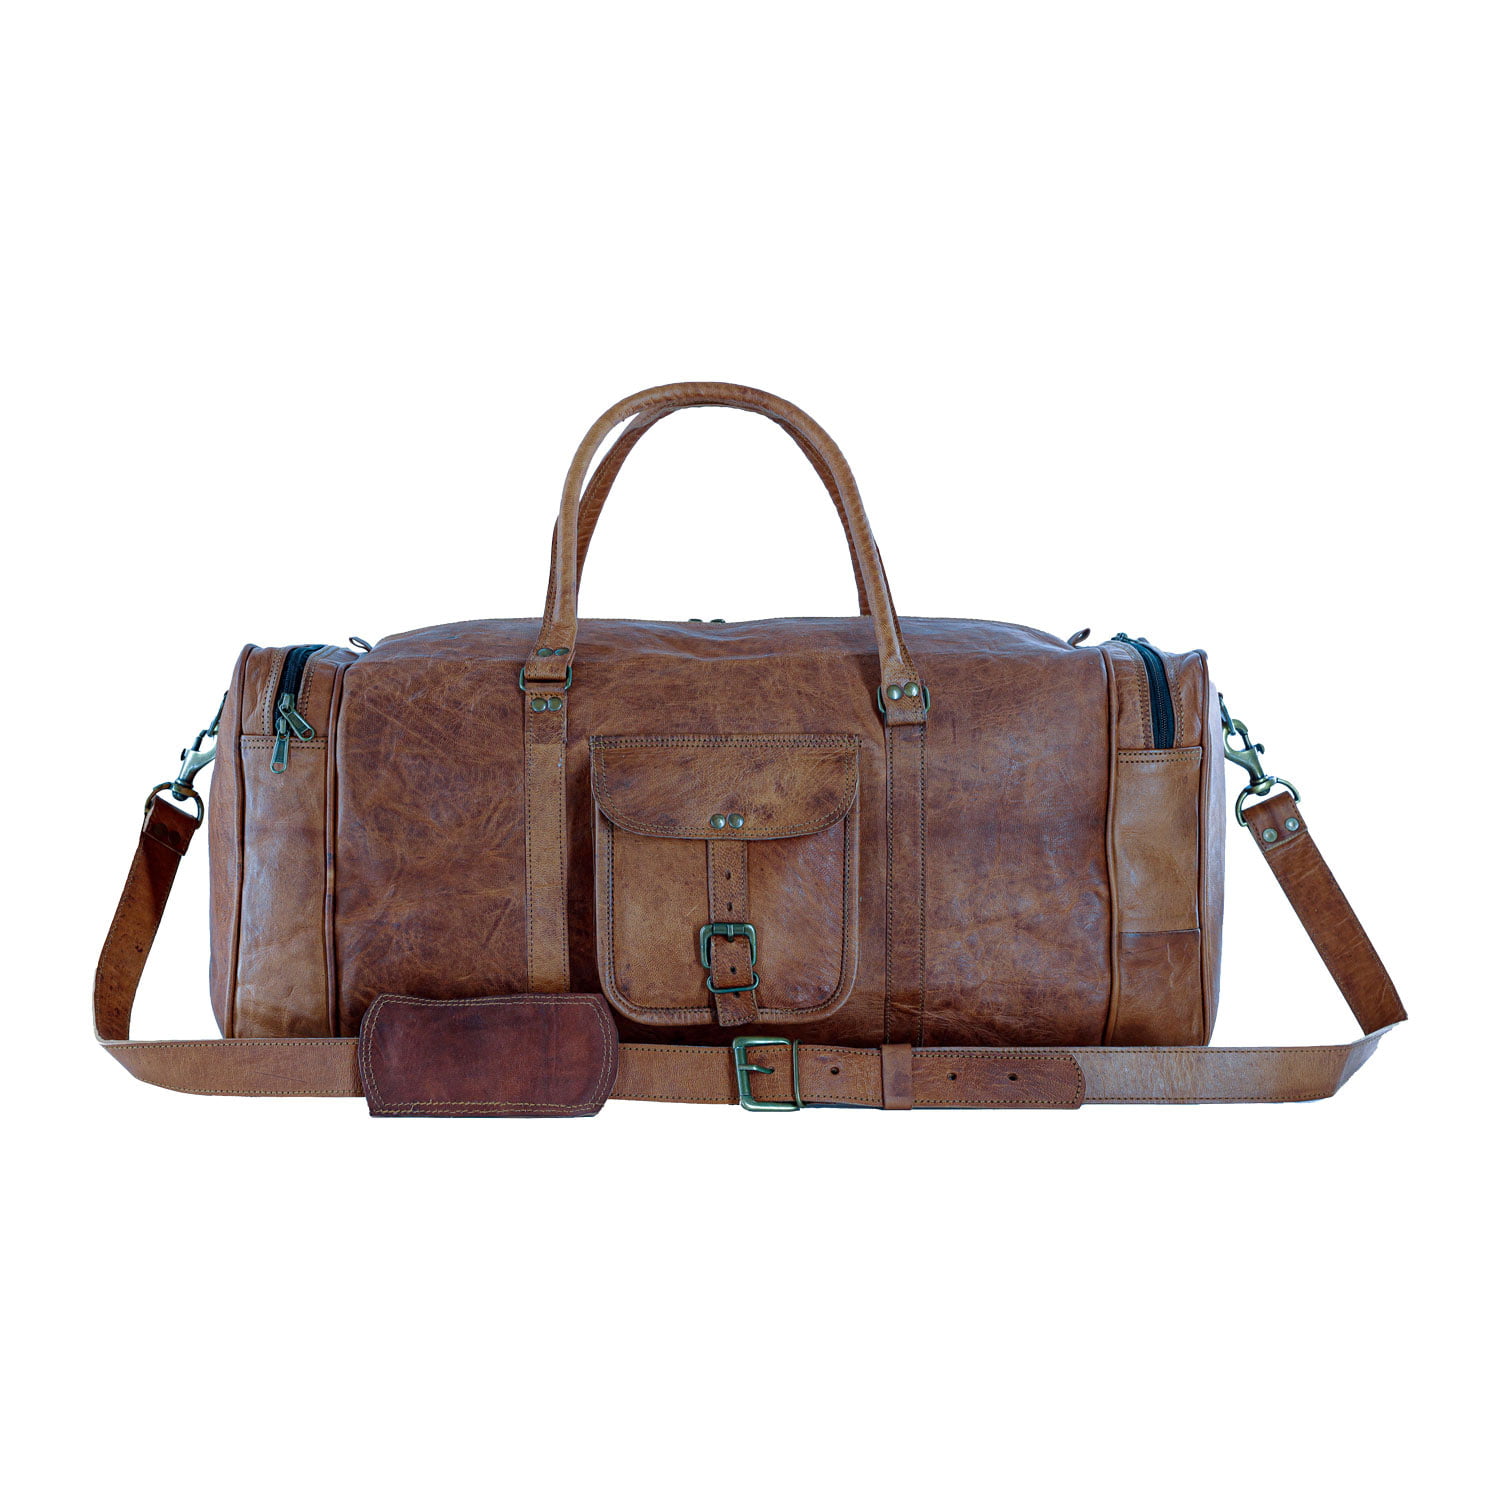 McKlein 88194 20 in. Kinzie Carry-All Leather Duffel, Brown